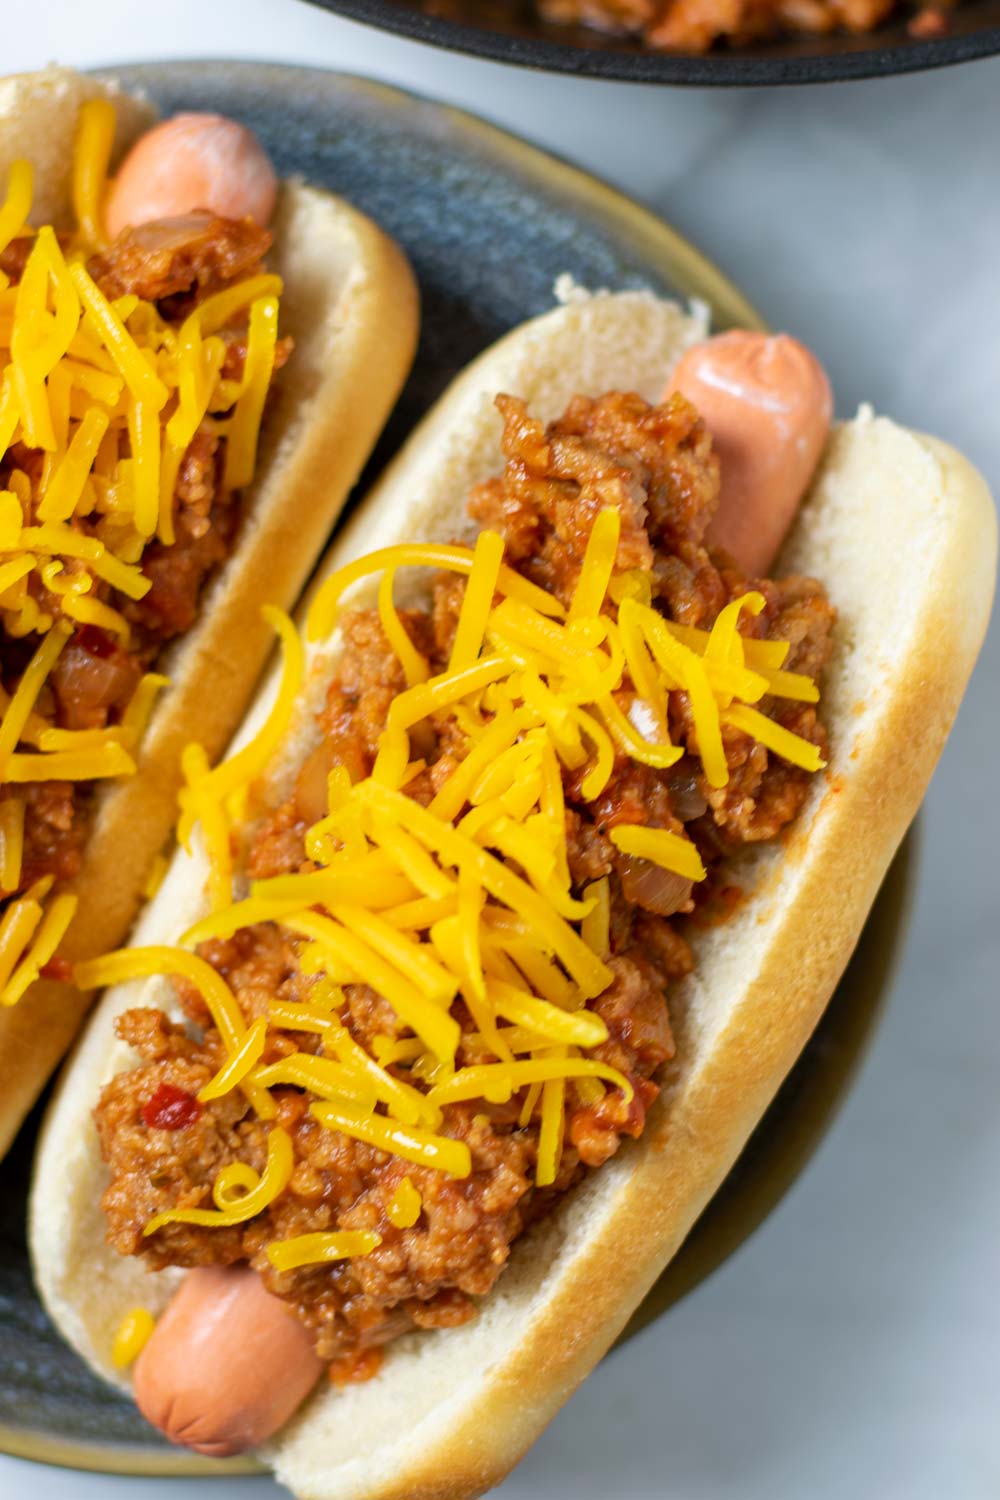 Top view of two hot dogs with the Hot Dog Chili.